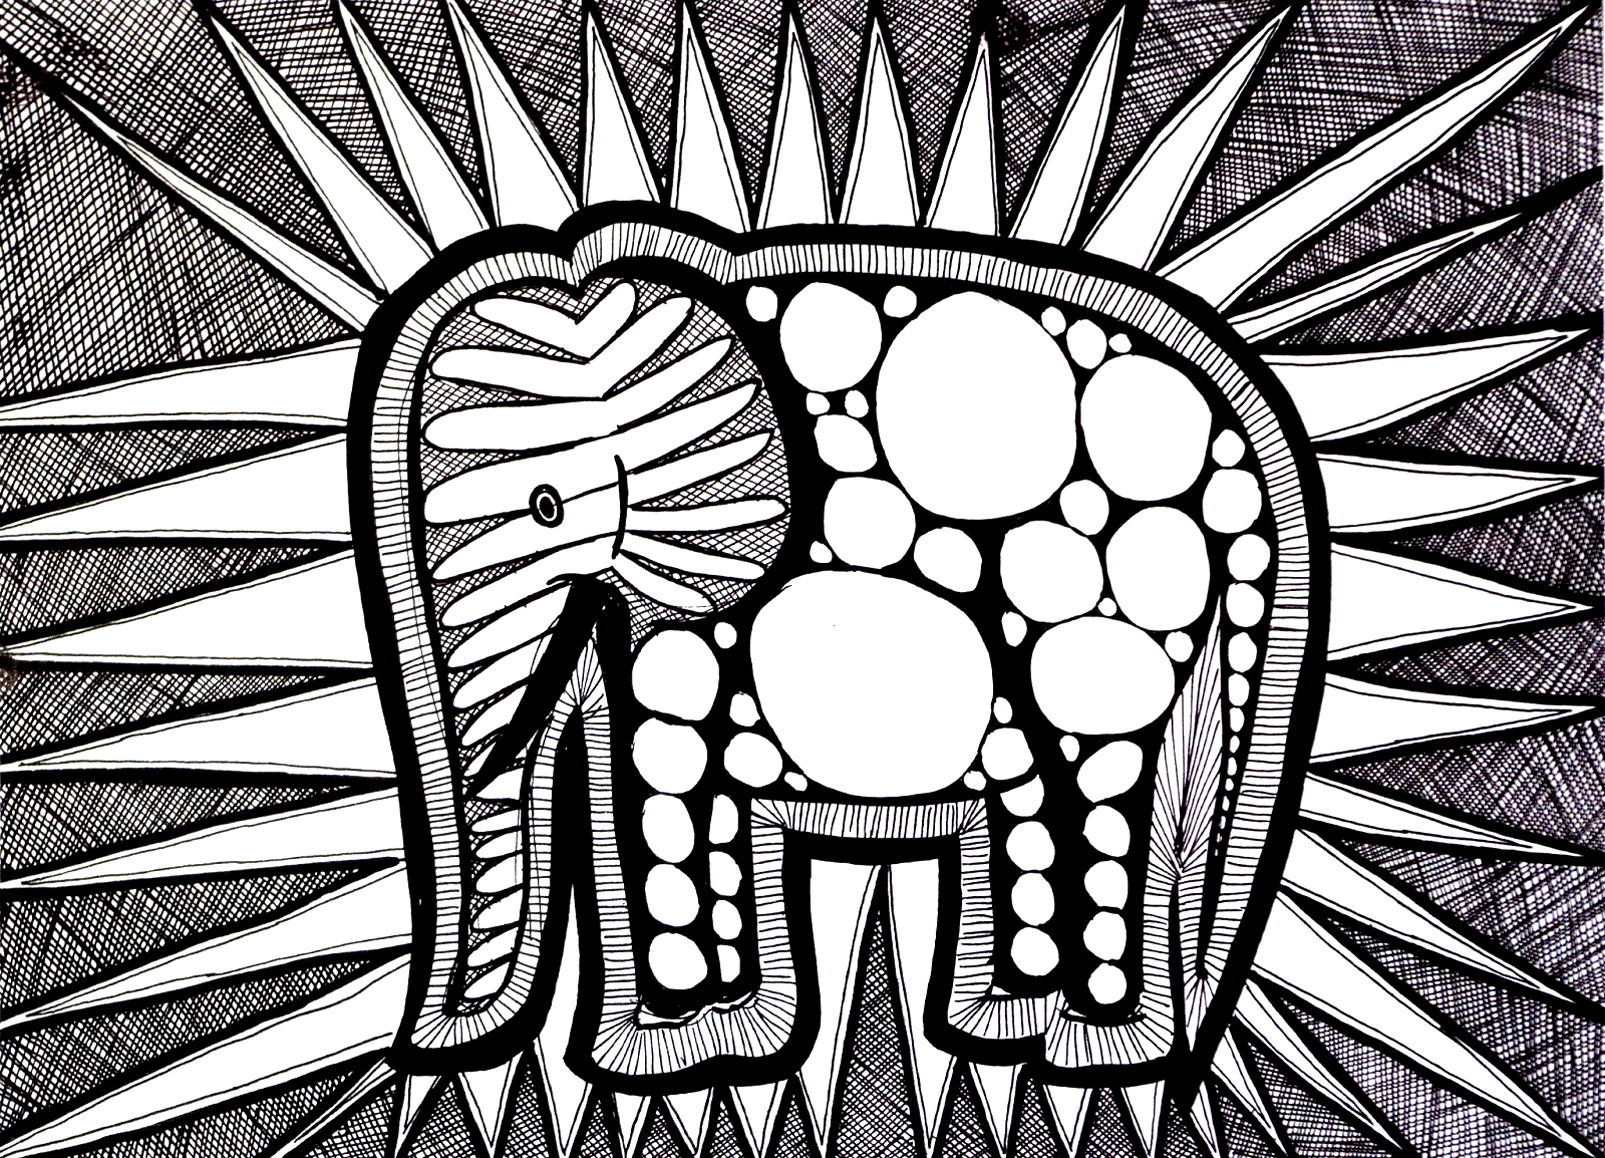 Difficult adult coloring of an elephant, made up of many different shapes and patterns. Lots of areas to color, preferably with fine markers!